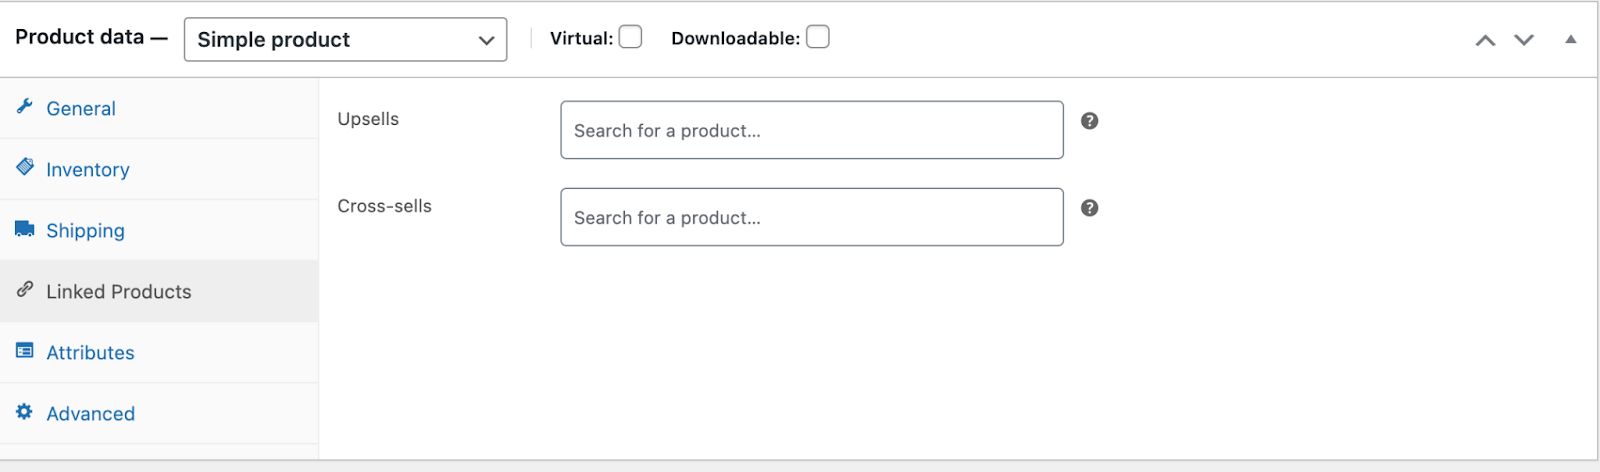 Clicking on “Linked Products” will give you options for upselling and cross-selling